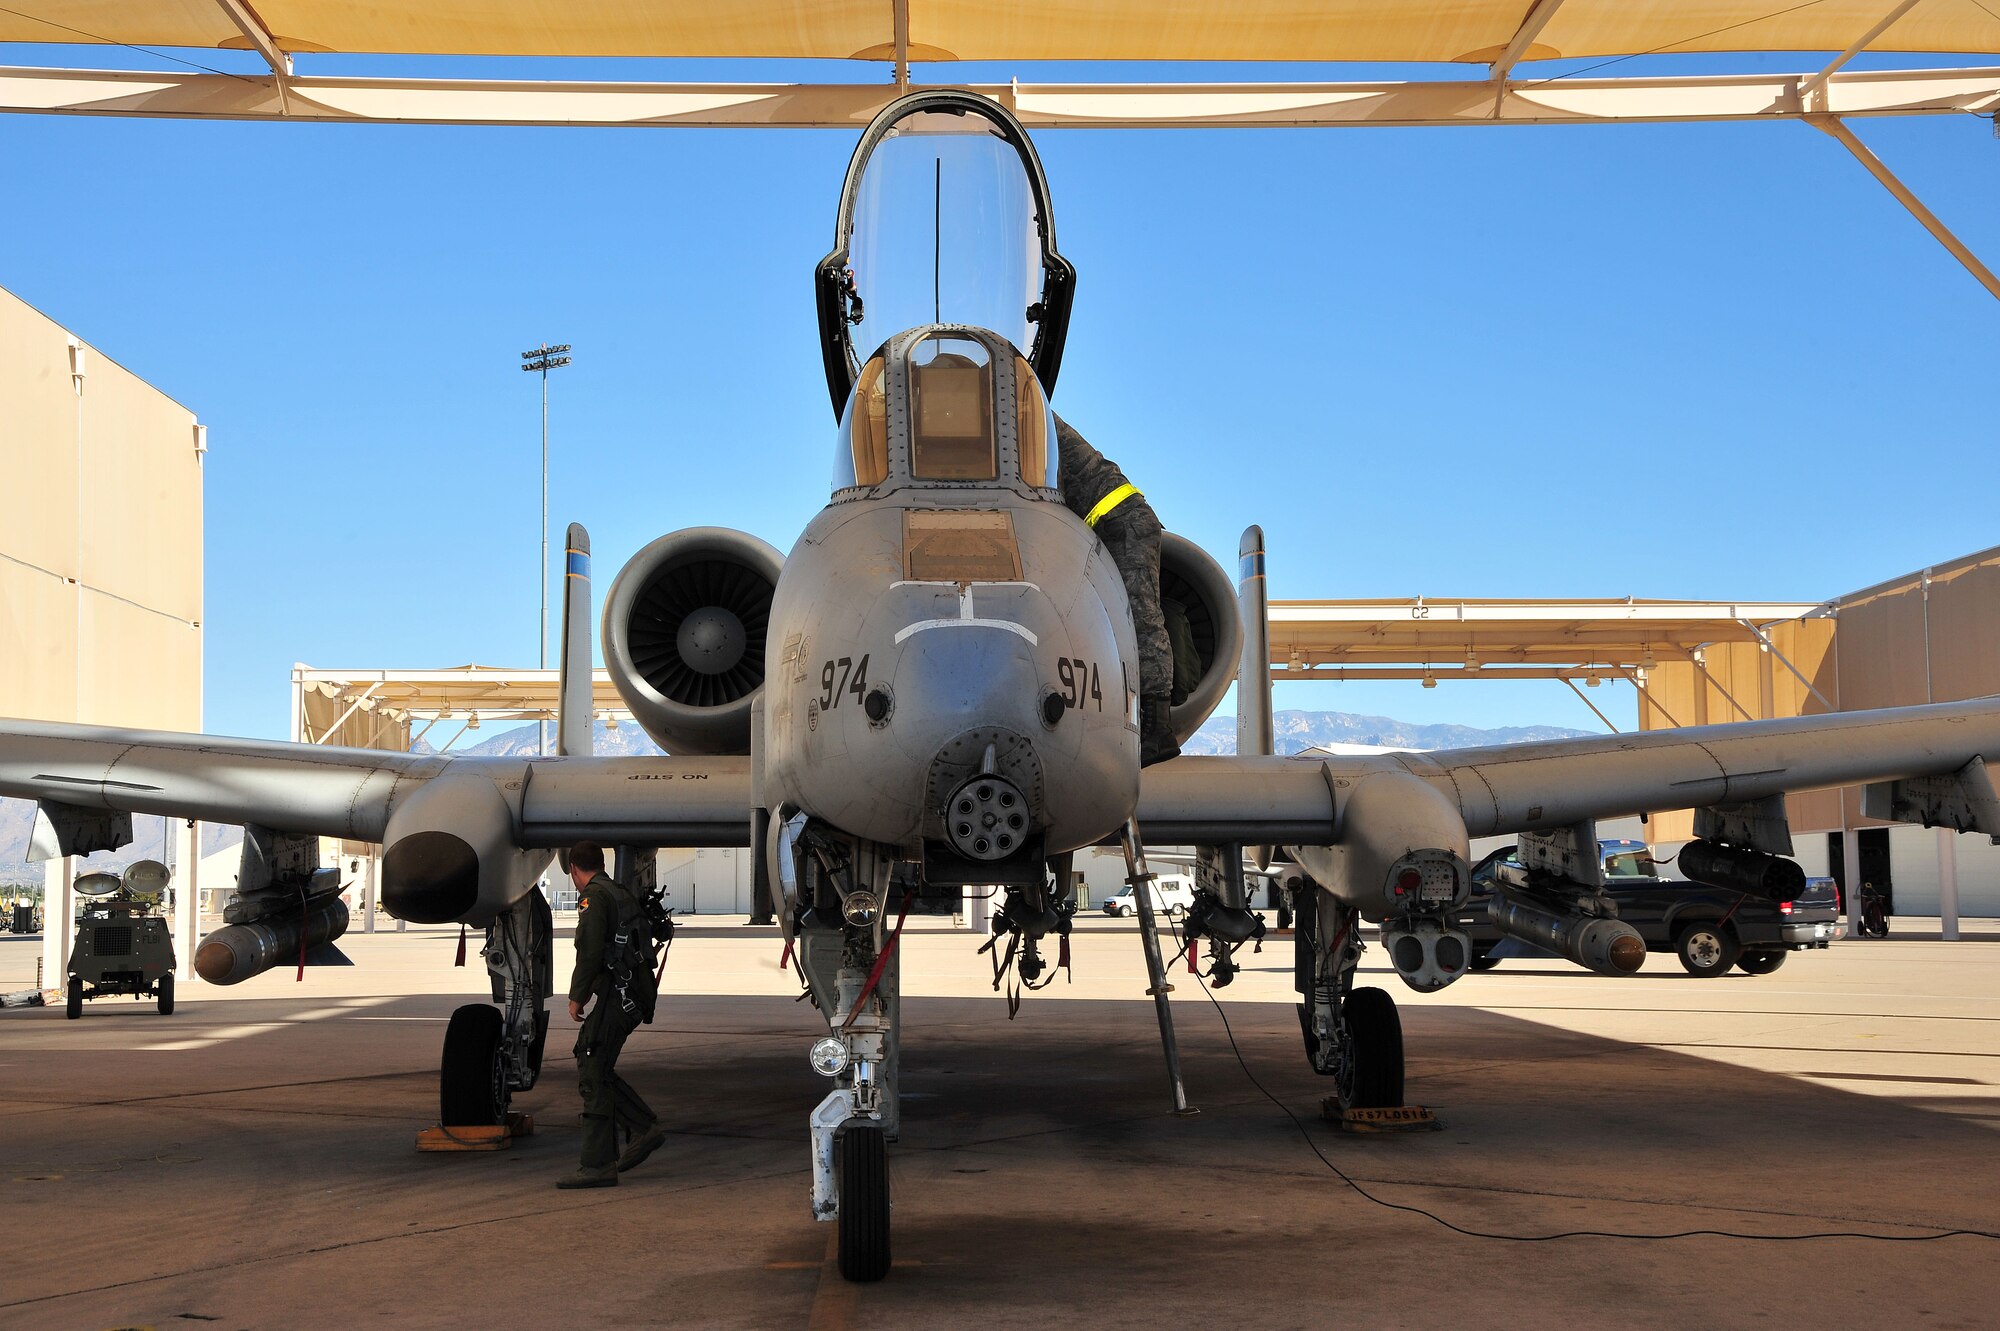 U.S. Air Force 1st Lt. William Piepenbring, 355th Training Squadron pilot, and Airman 1st Class William Flores, 355th Aircraft Maintenance Squadron crew chief, perform a preflight check at Davis-Monthan Air Force Base, Ariz., Nov. 8, 2013. The pilots and crew chiefs must complete a list of preflight safety checks to help prevent any inflight emergencies.(U.S. Air Force photo by Senior Airman Josh Slavin/Released)